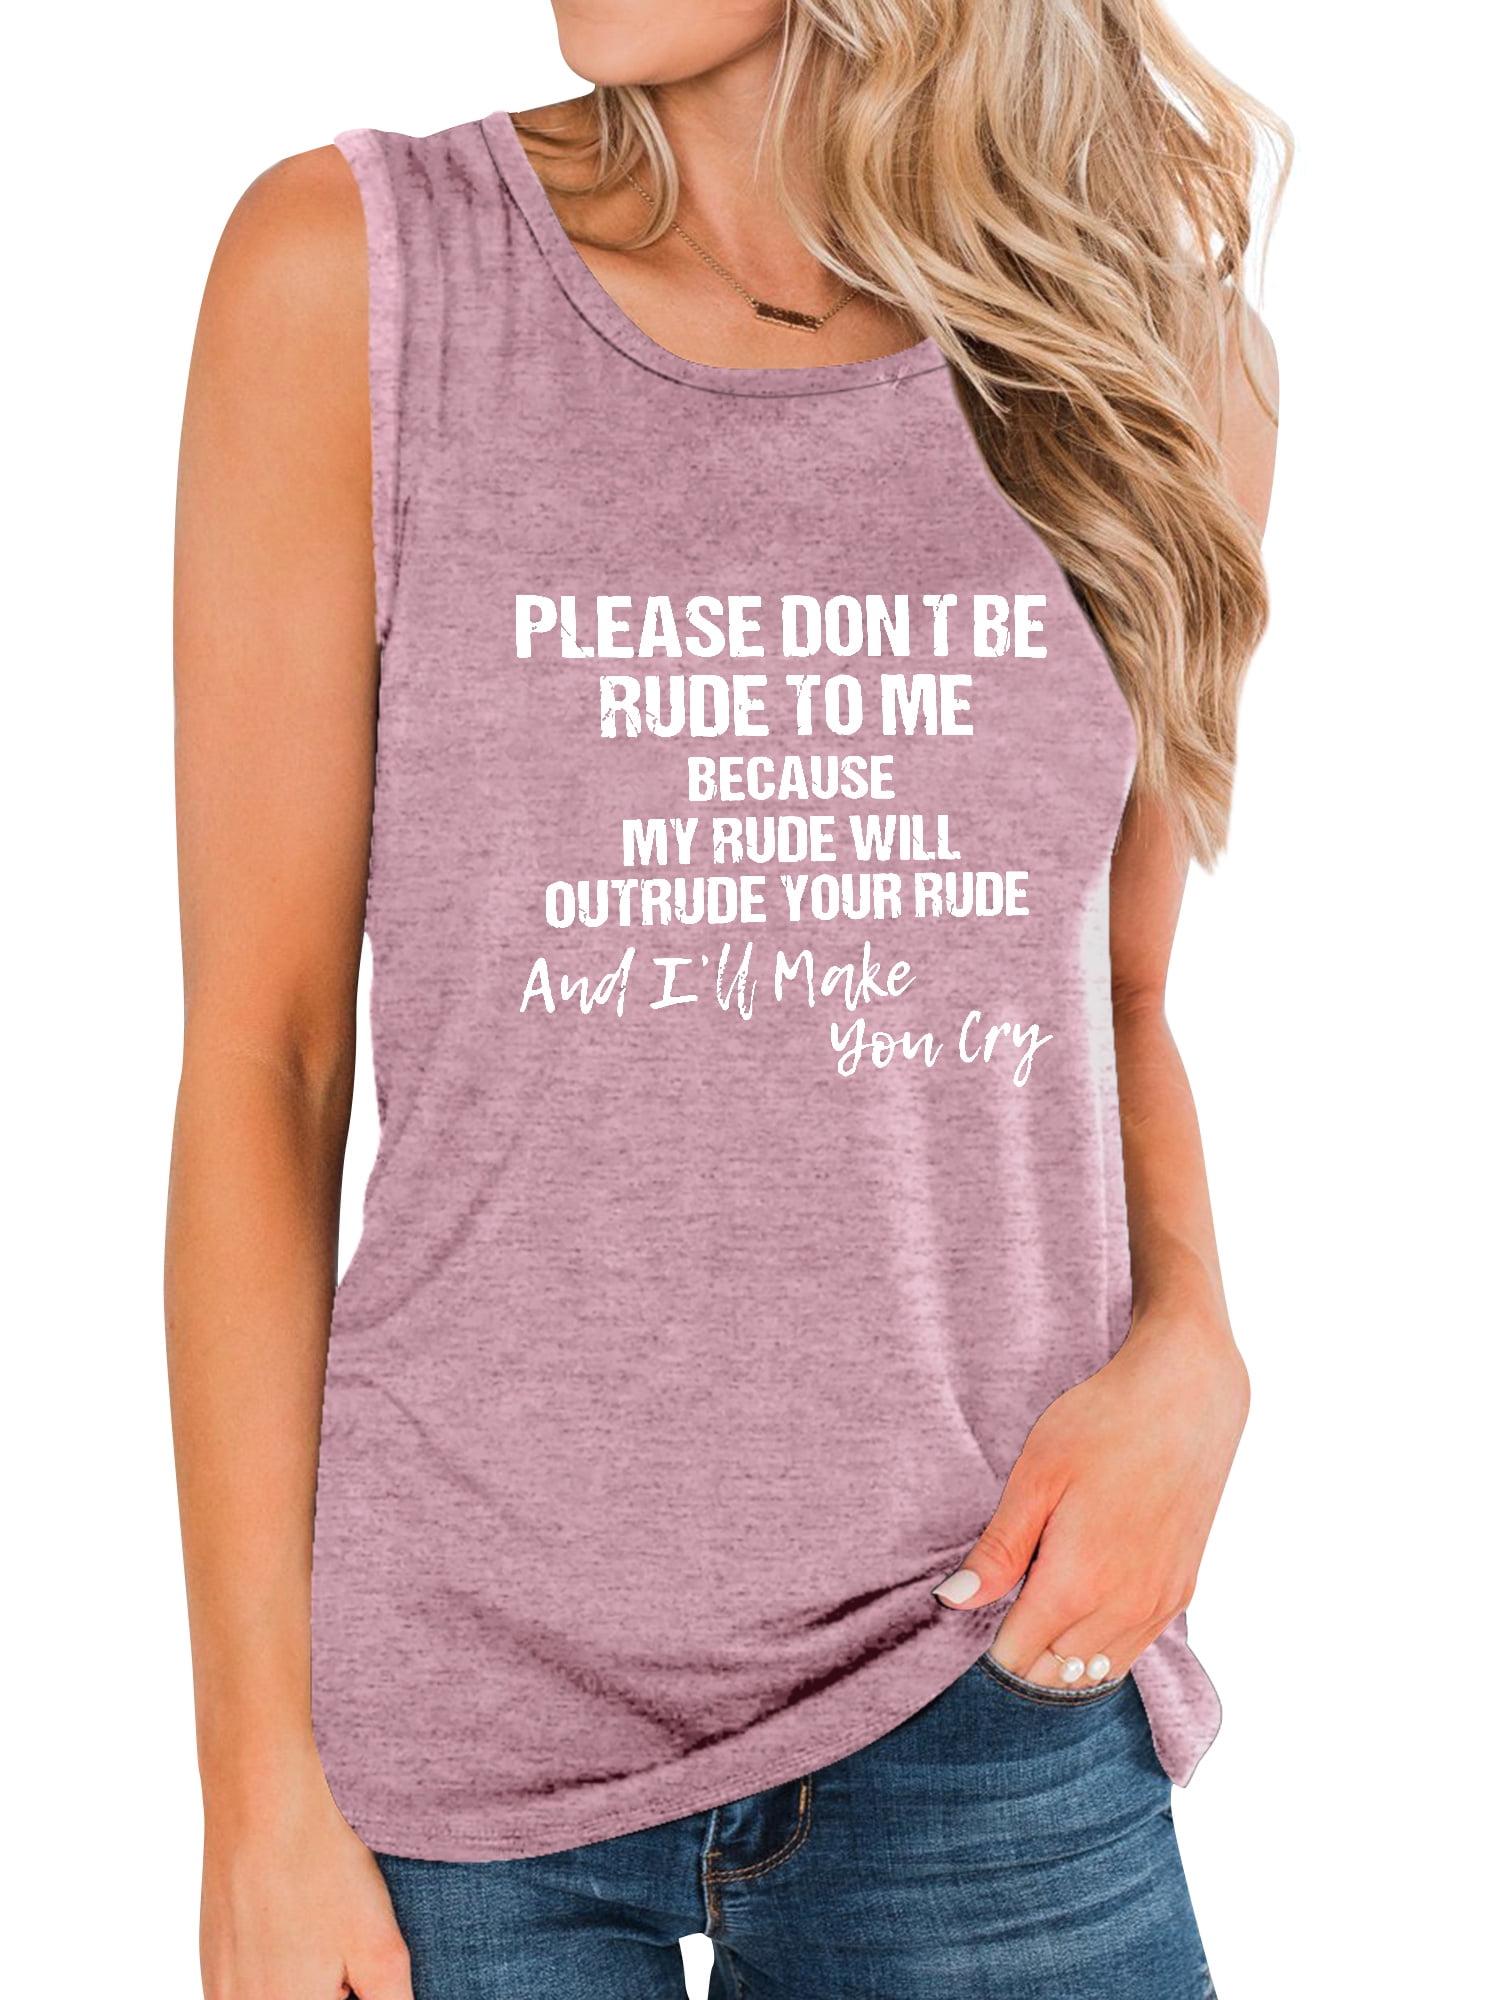 Mom Hair Don't Care Tank Funny Ladies Racerback Shirt Tank Girl Life Womens Tank Collection